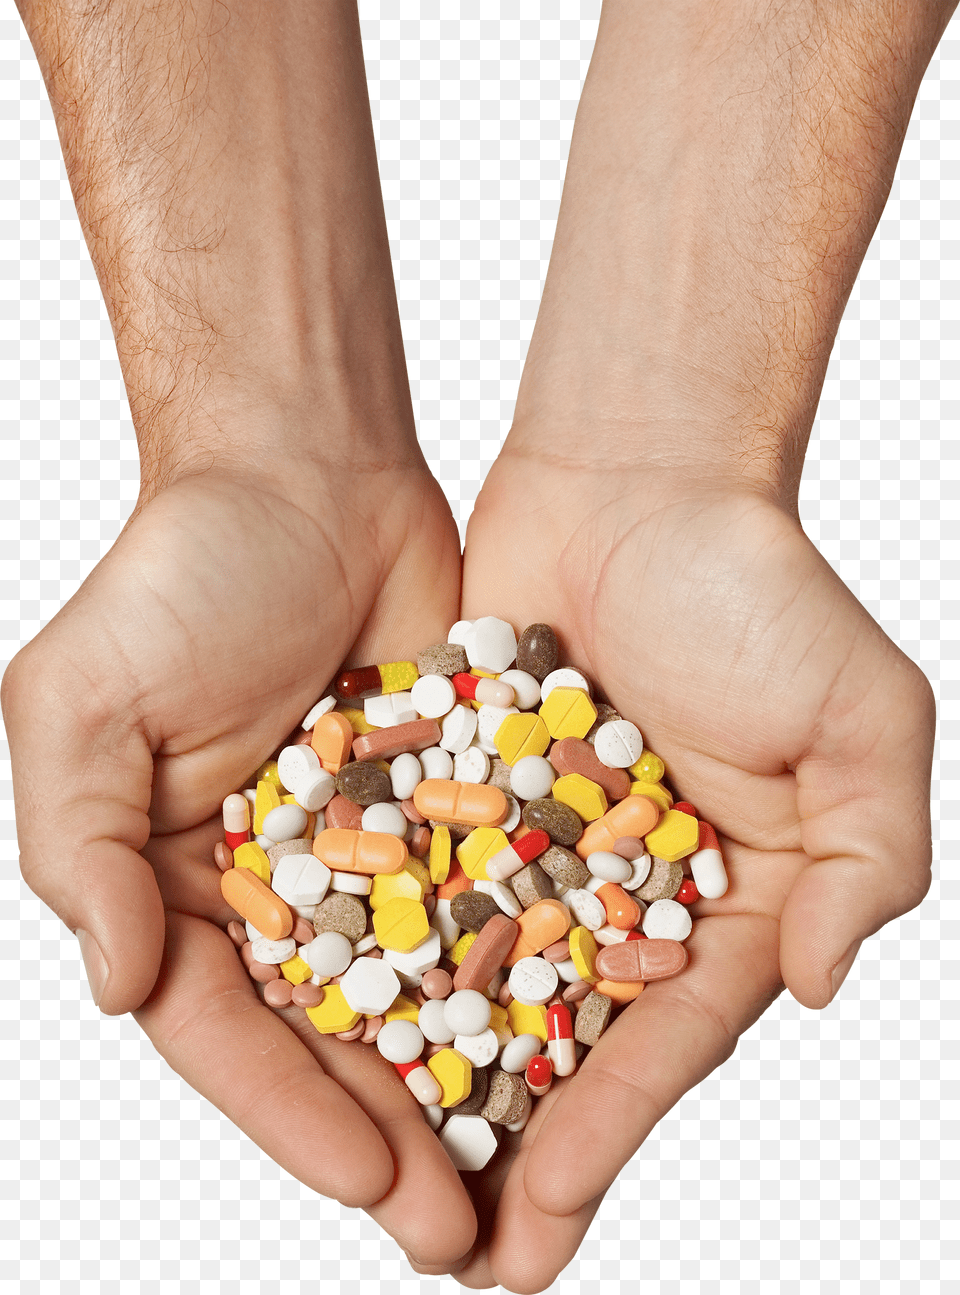 Image Freeuse Two Hands Holding Medicine Isolated Hands Holding Pills Free Png Download